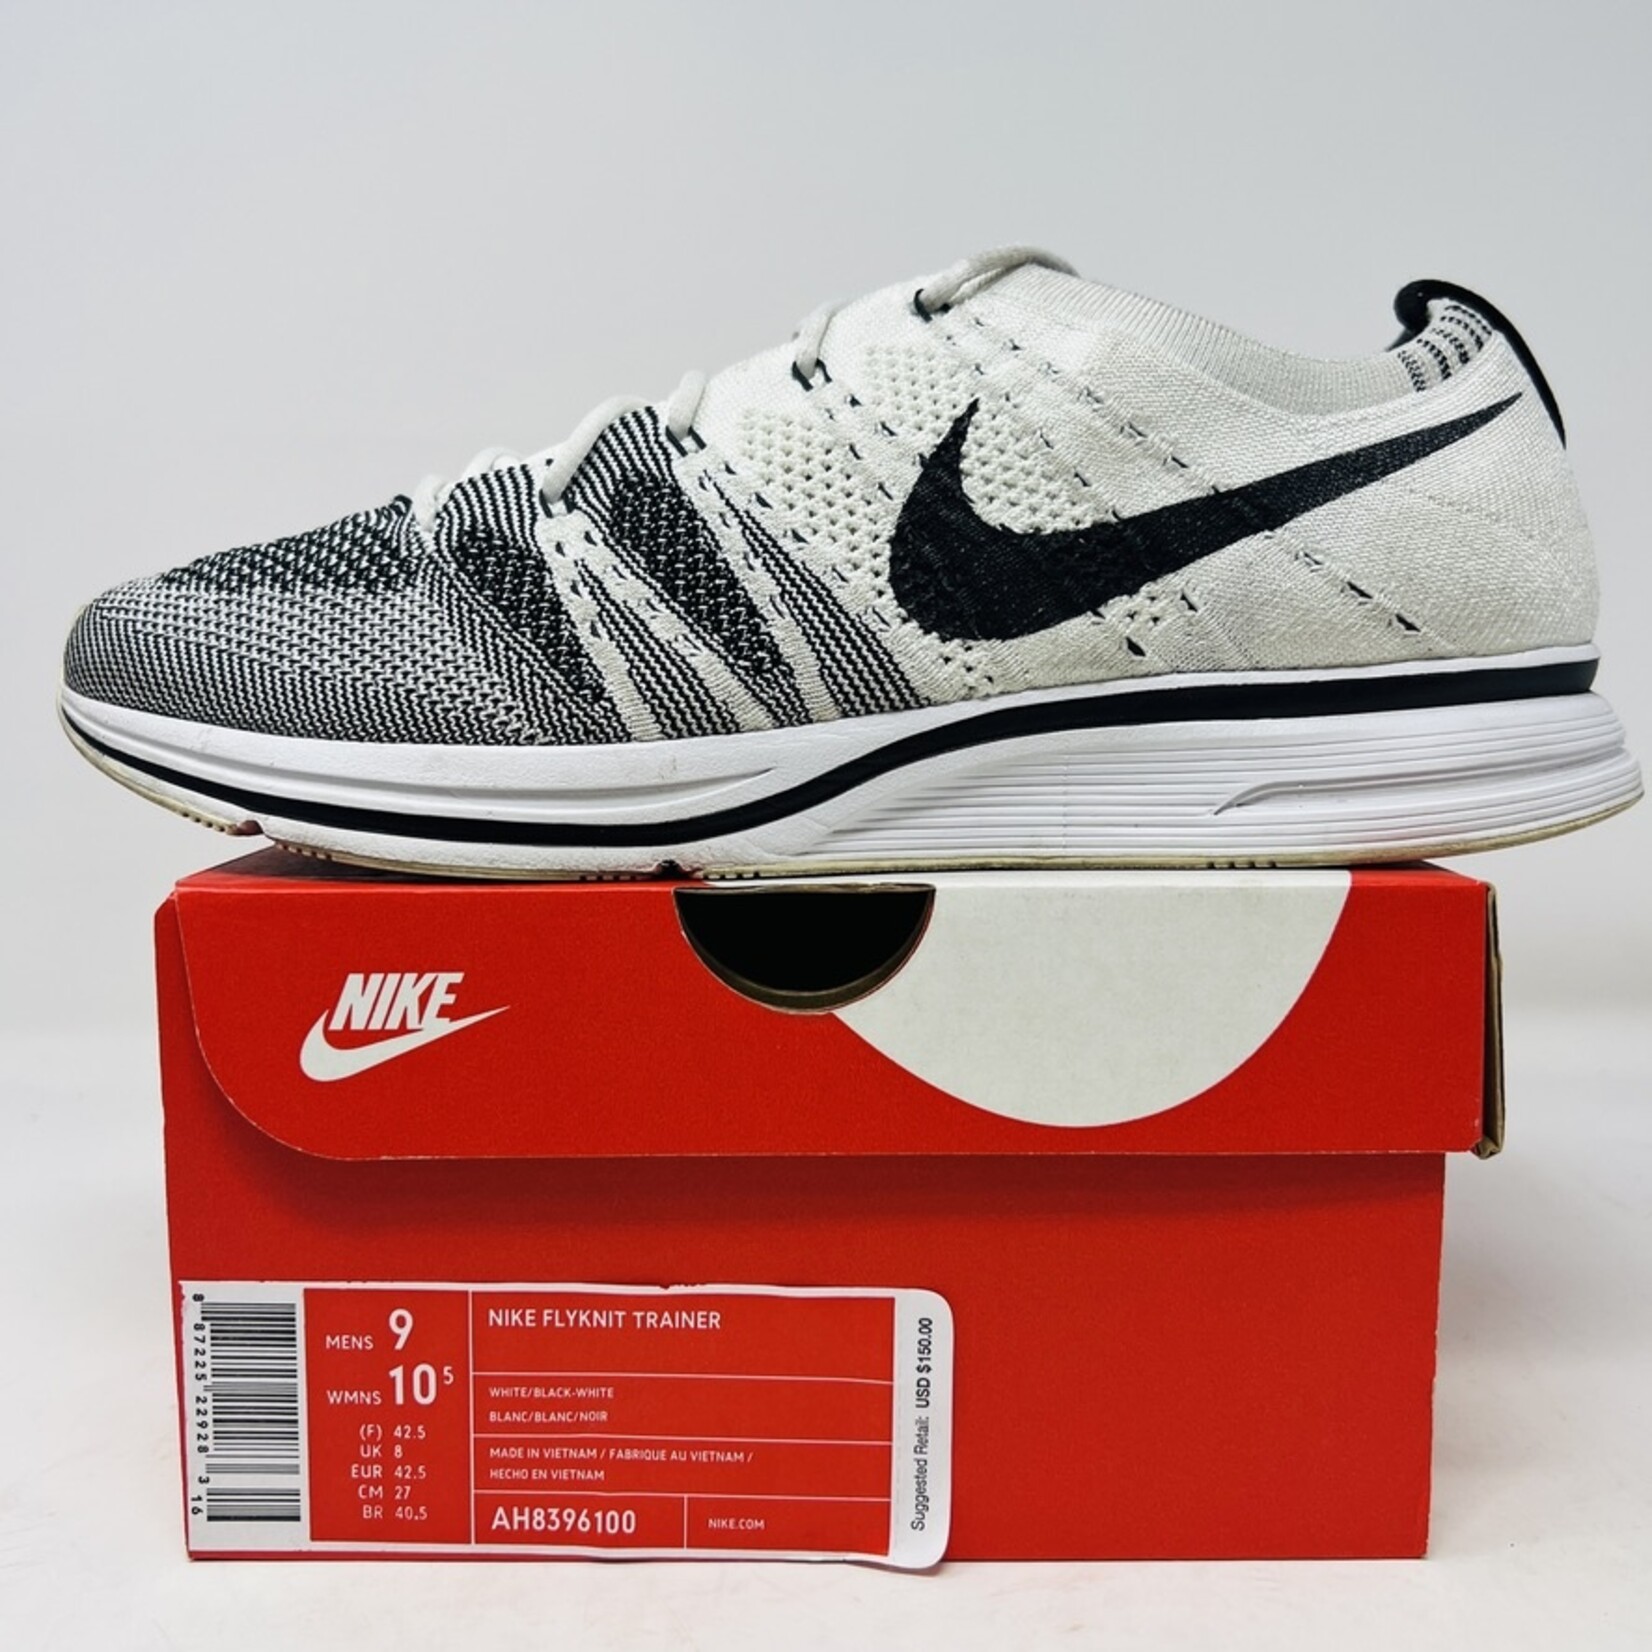 Nike Flyknit Trainer White Black (2017) - Holy Ground - Buy, Sell & Sneakers